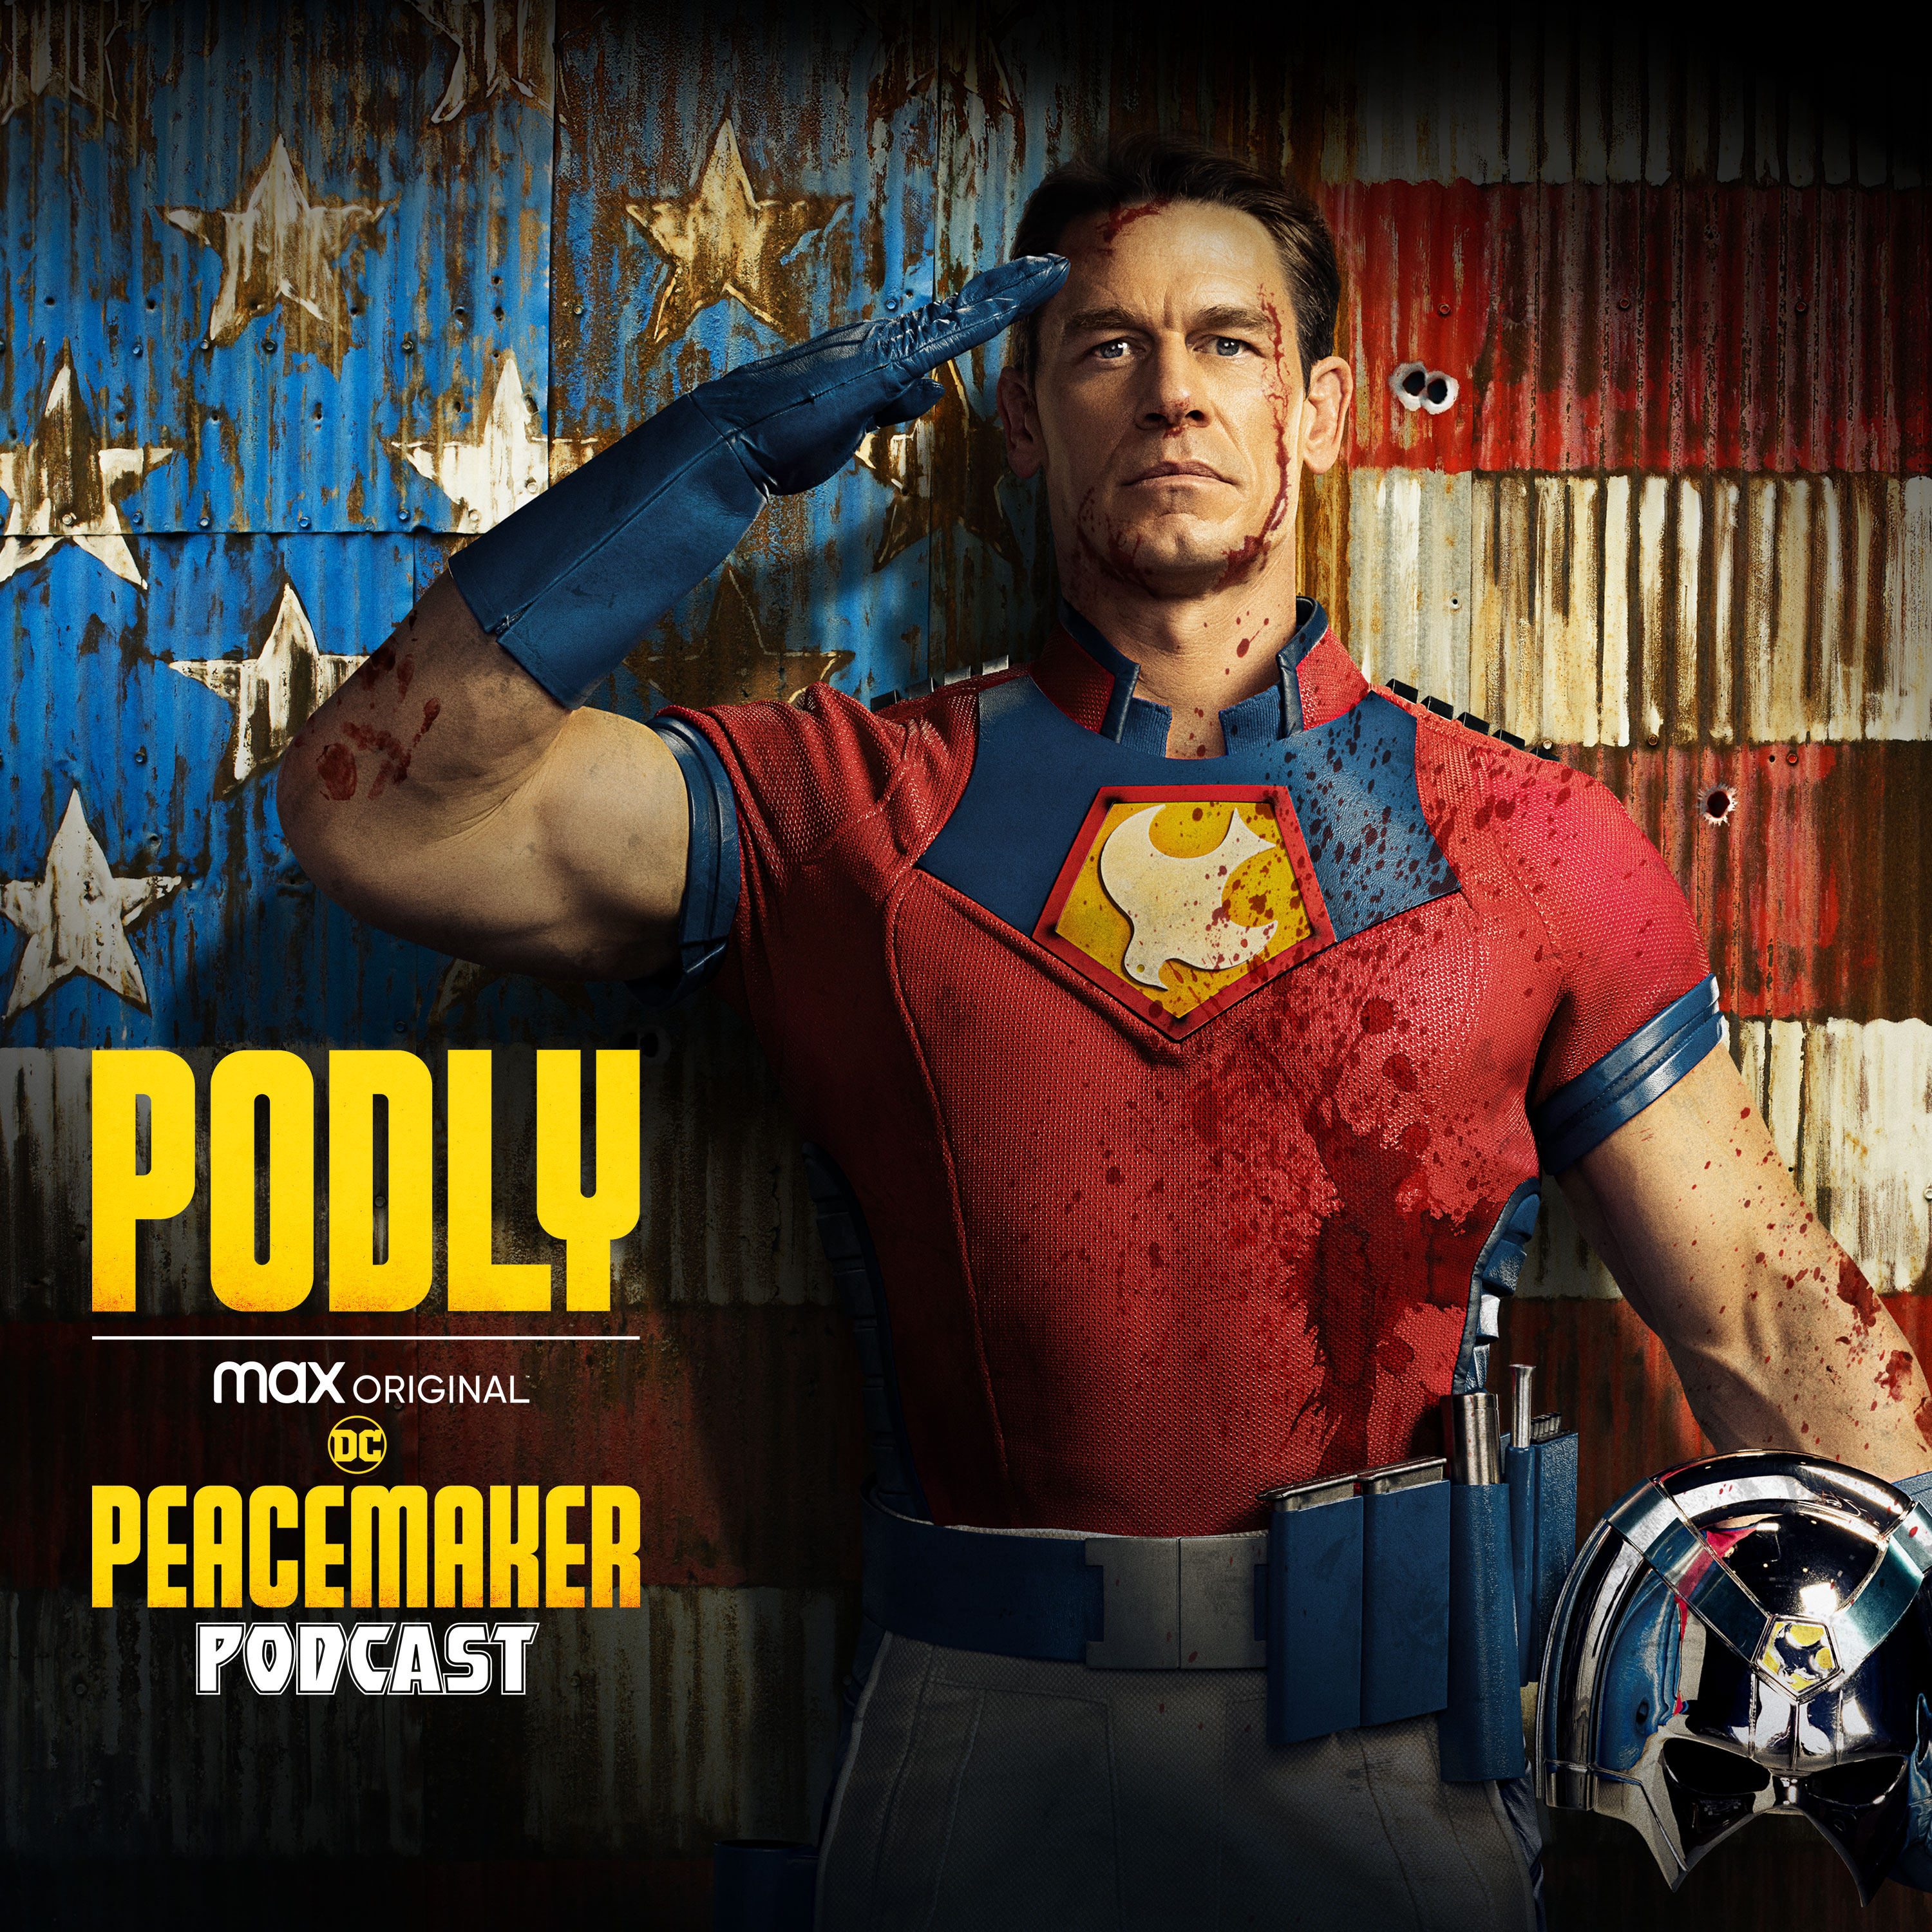 PODLY: THE OFFICIAL PEACEMAKER COMPANION PODCAST